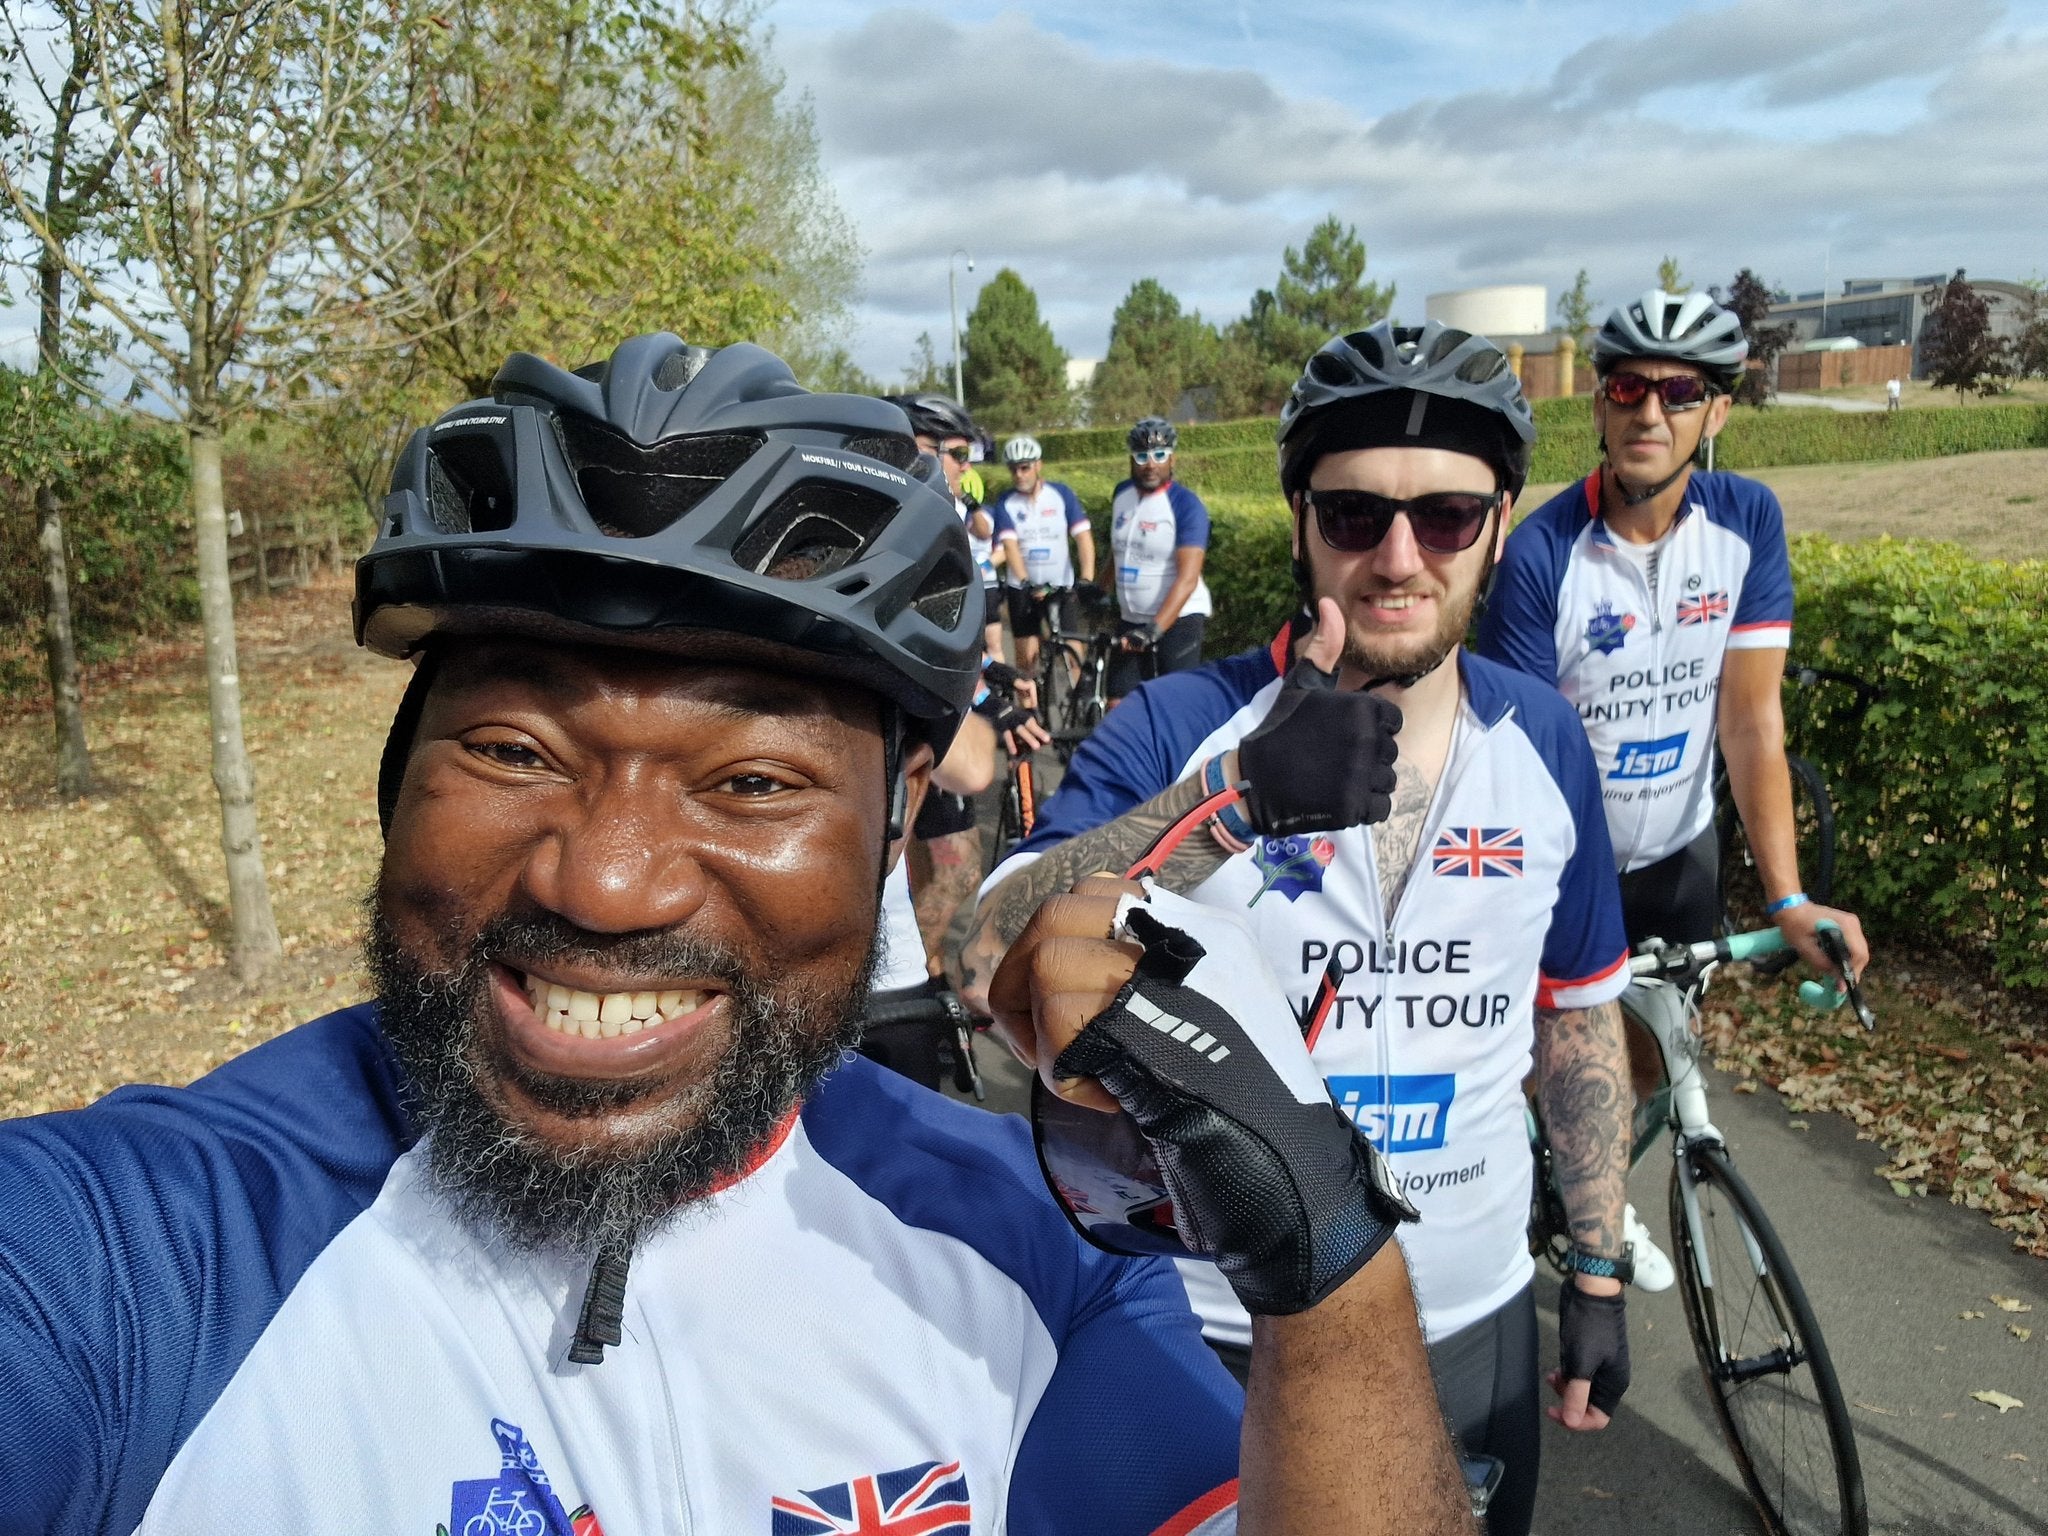 Festus Akinbusoye, the Conservative candidate in the Mid Bedfordshire by-election, gets on his bike